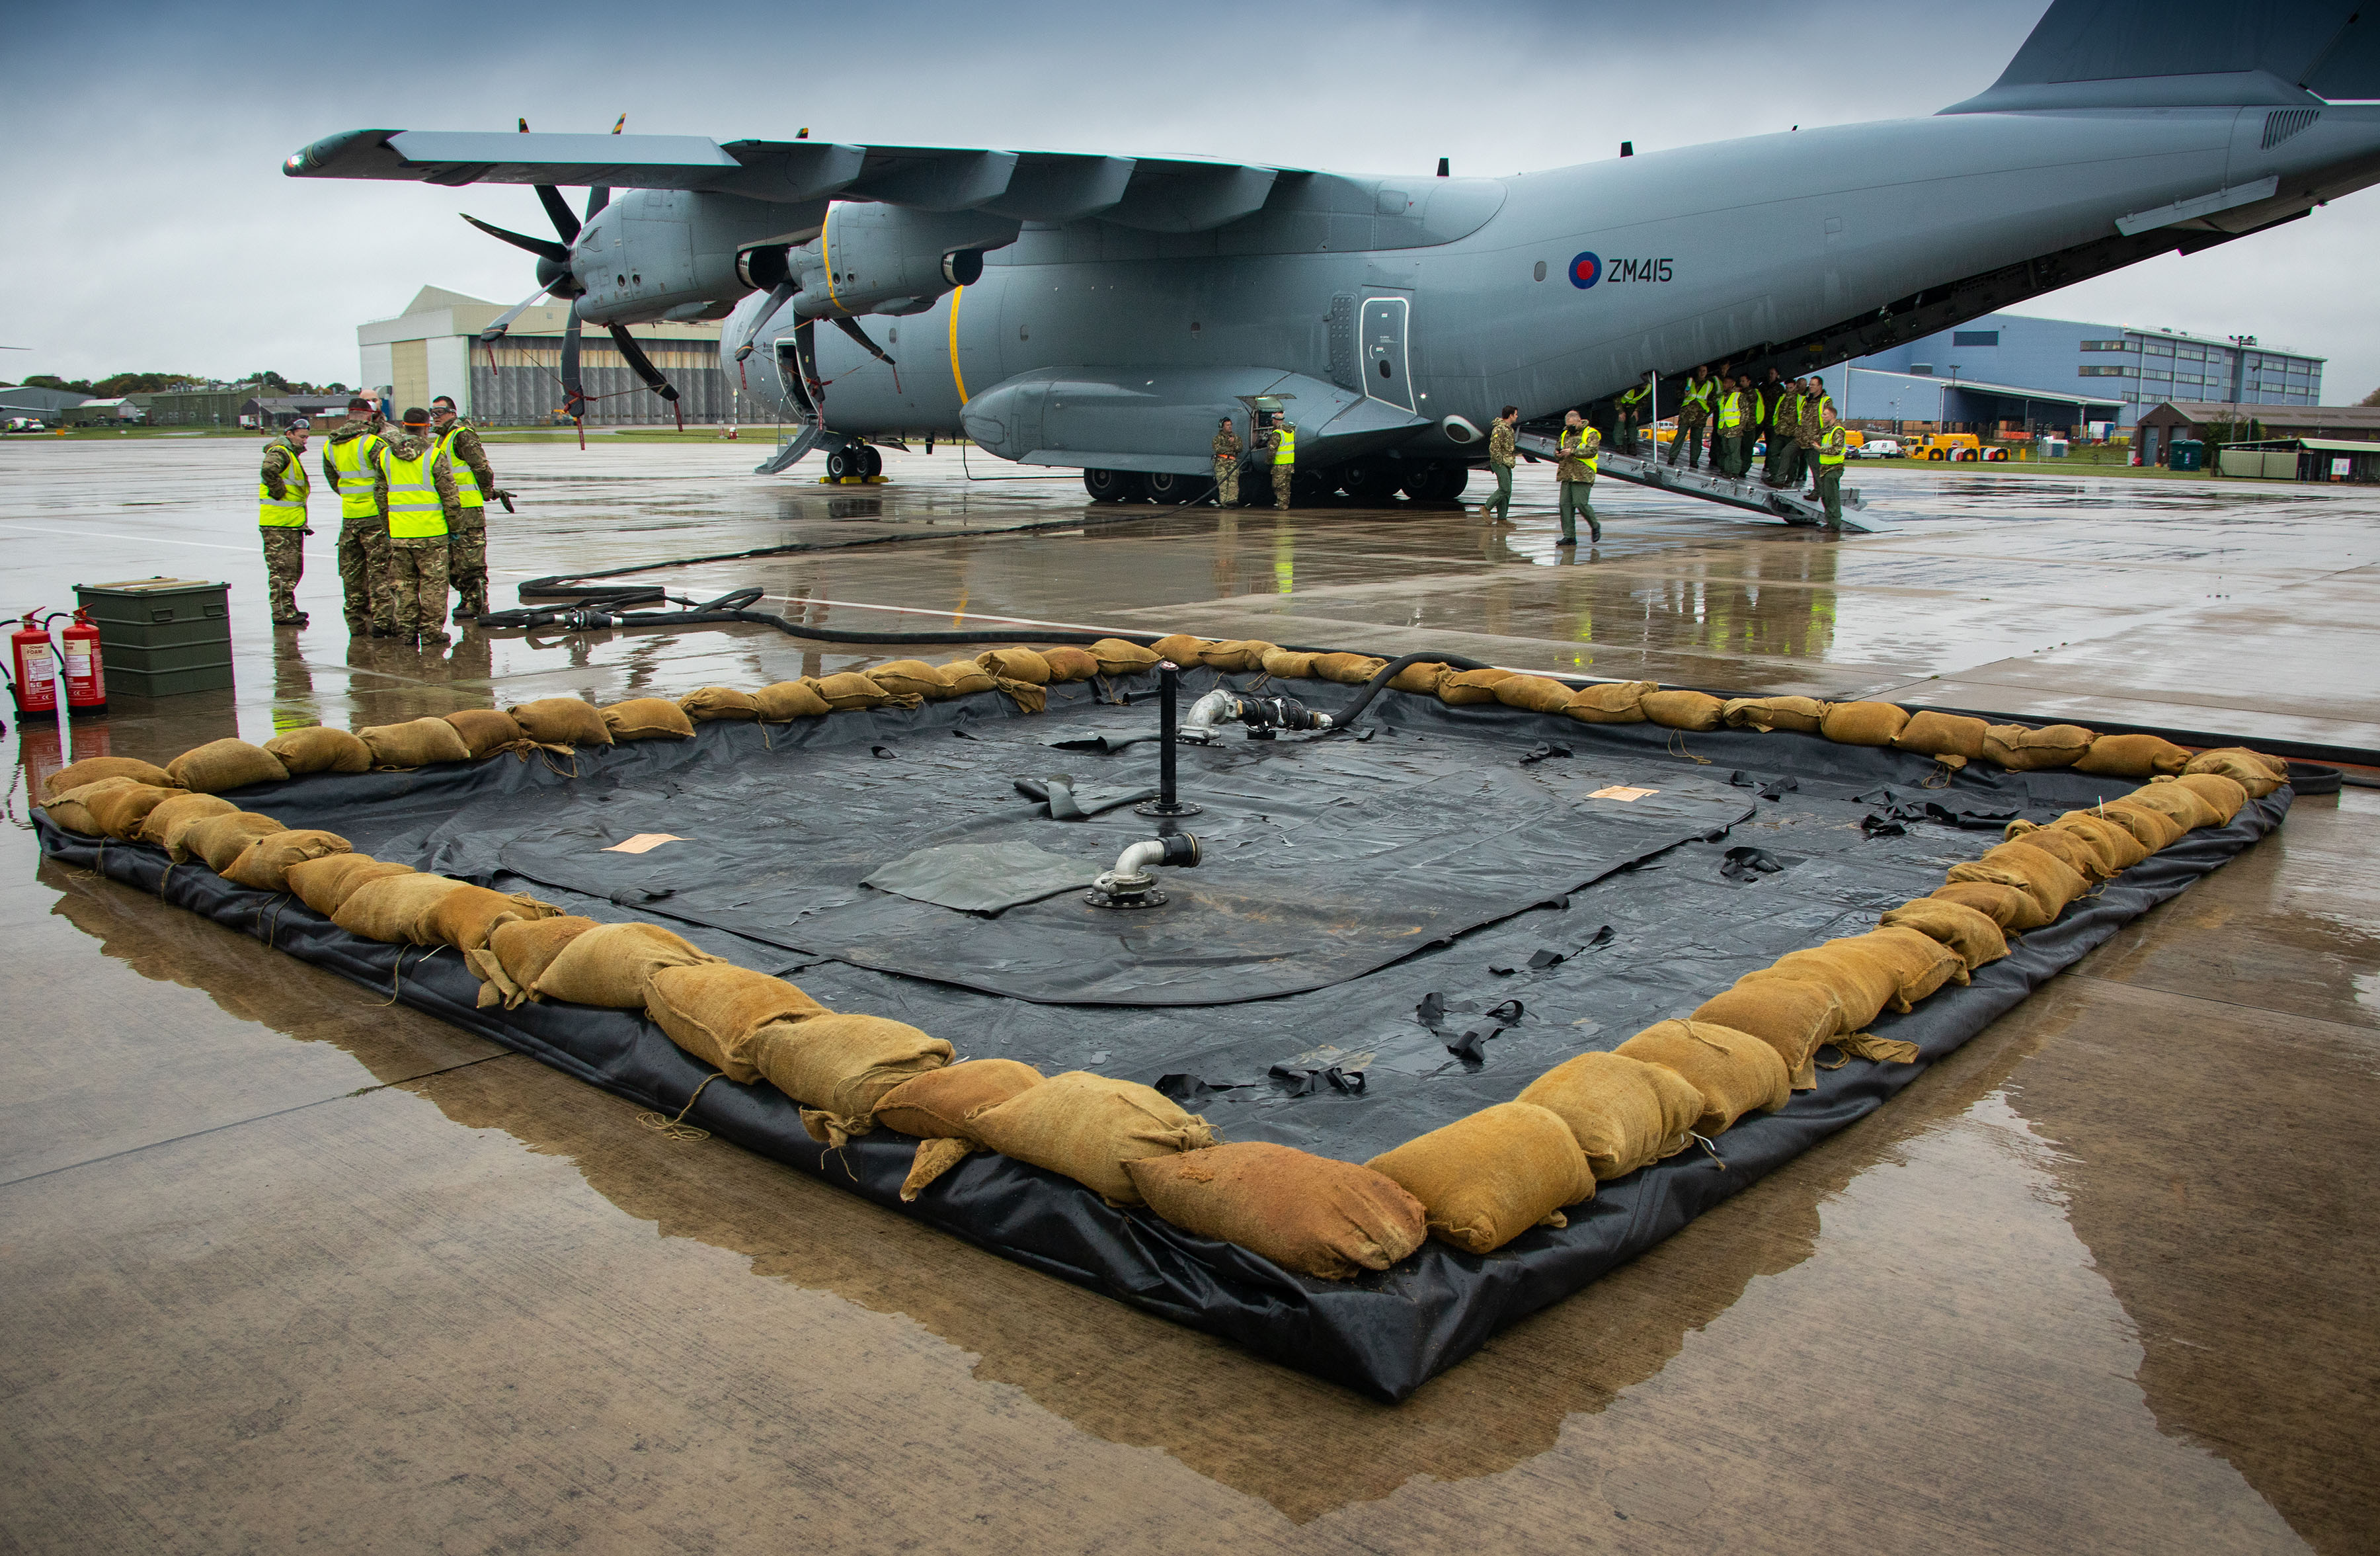 Fuels specialists from the A4 Force Elements at RAF Wittering